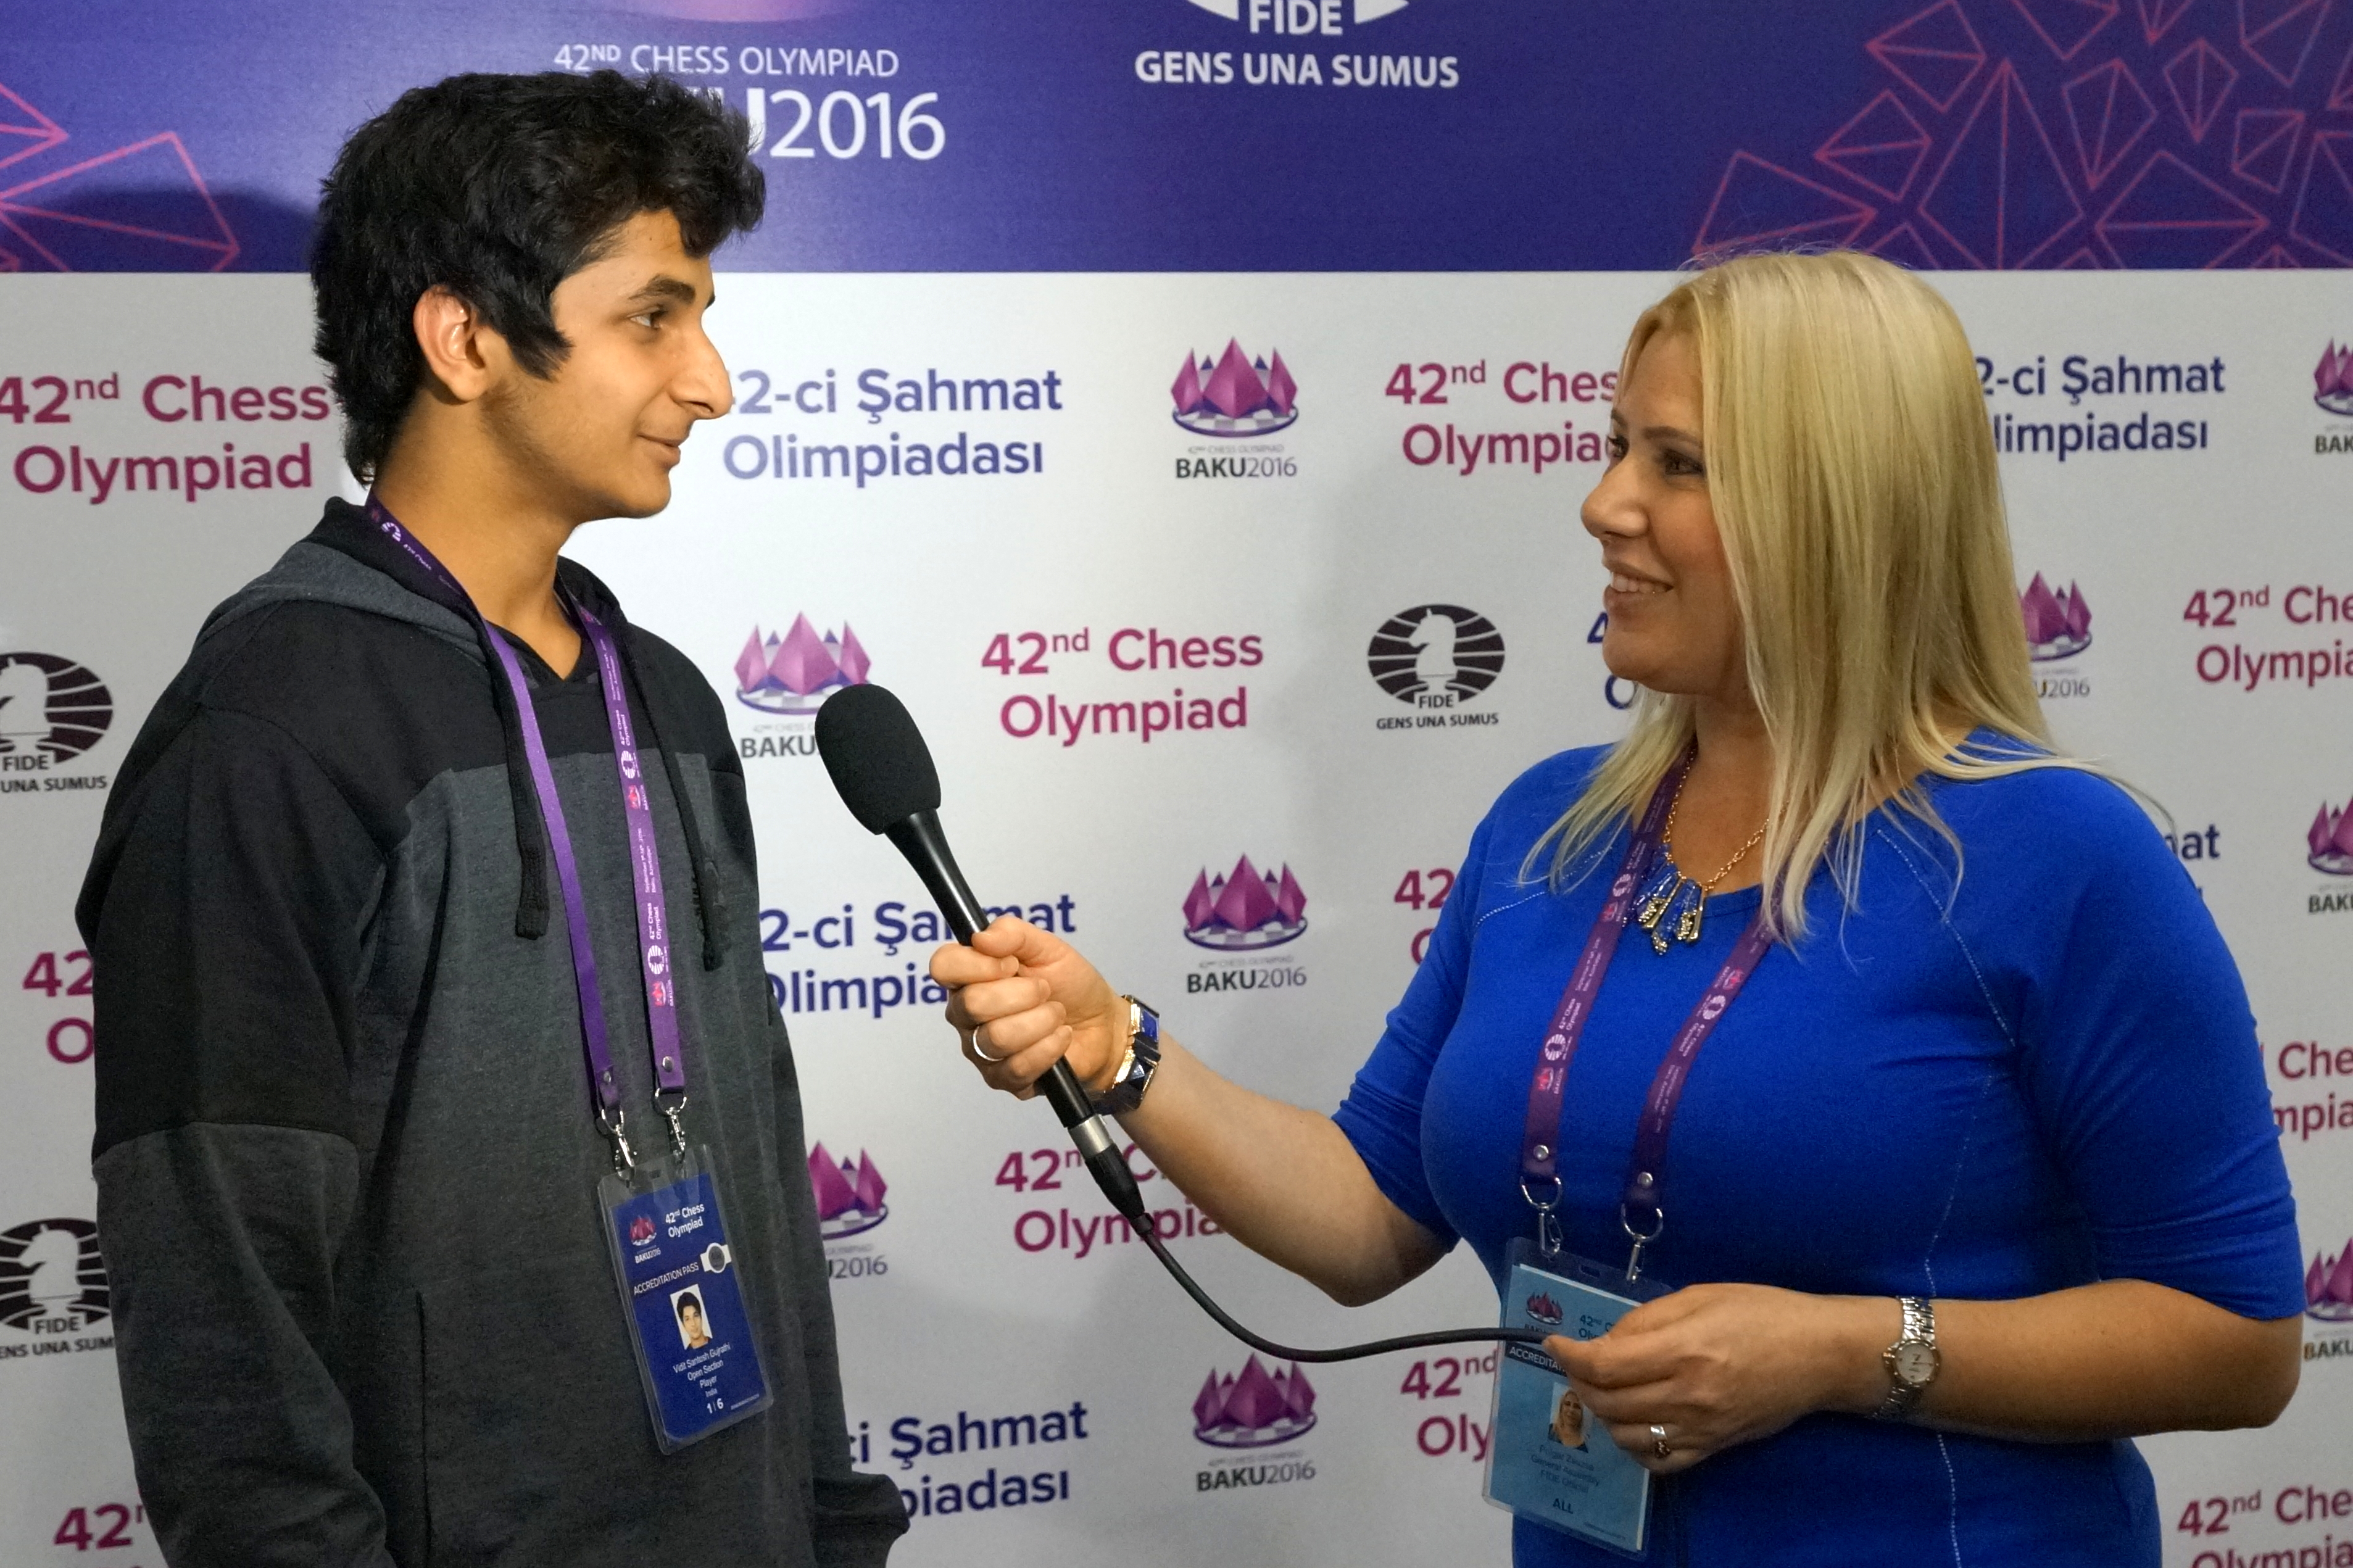 Vidit Gujrathi 'relieved' after crossing coveted 2,700 Elo rating